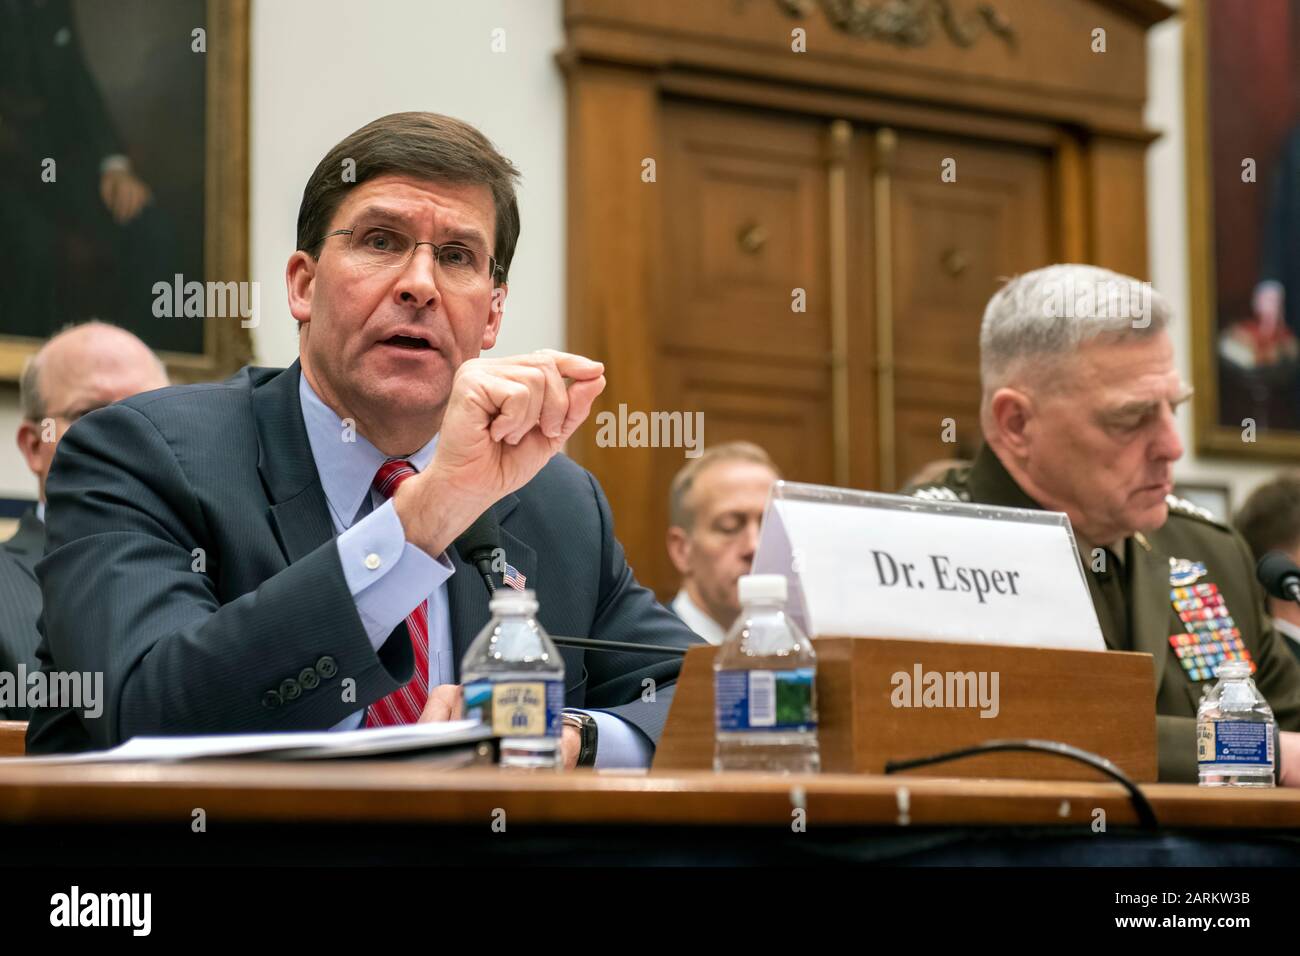 Secretary of Defense Mark T. Esper and Army Gen. Mark A. Milley, chairman of the Joint Chiefs of Staff, appear on Captiol Hill for a House Armed Service Committee hearing on Syria and Middle East policy, Washington D.C., Dec. 11, 2019. (DOD photo by U.S. Army Sgt. 1st Class Chuck Burden) Stock Photo